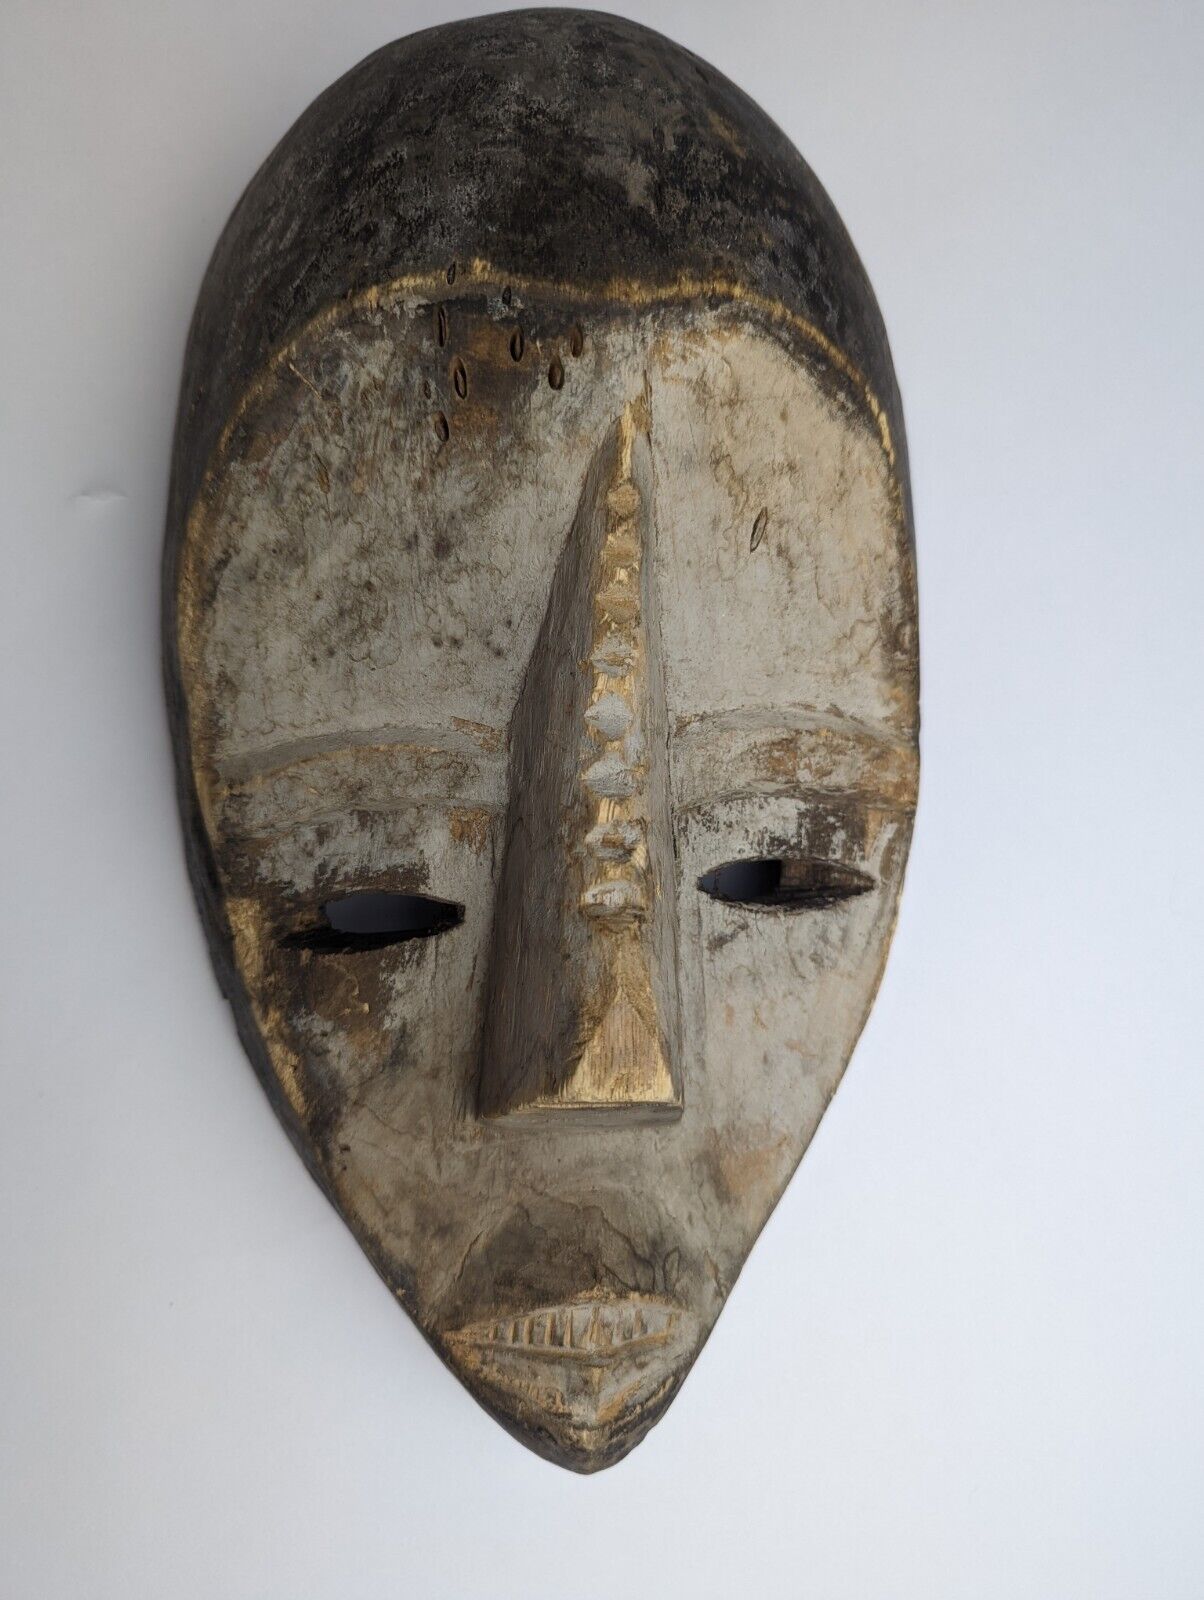 Vintage African Tribal Face Mask Hand Carved Wood Wall Hanging Wooden Decor